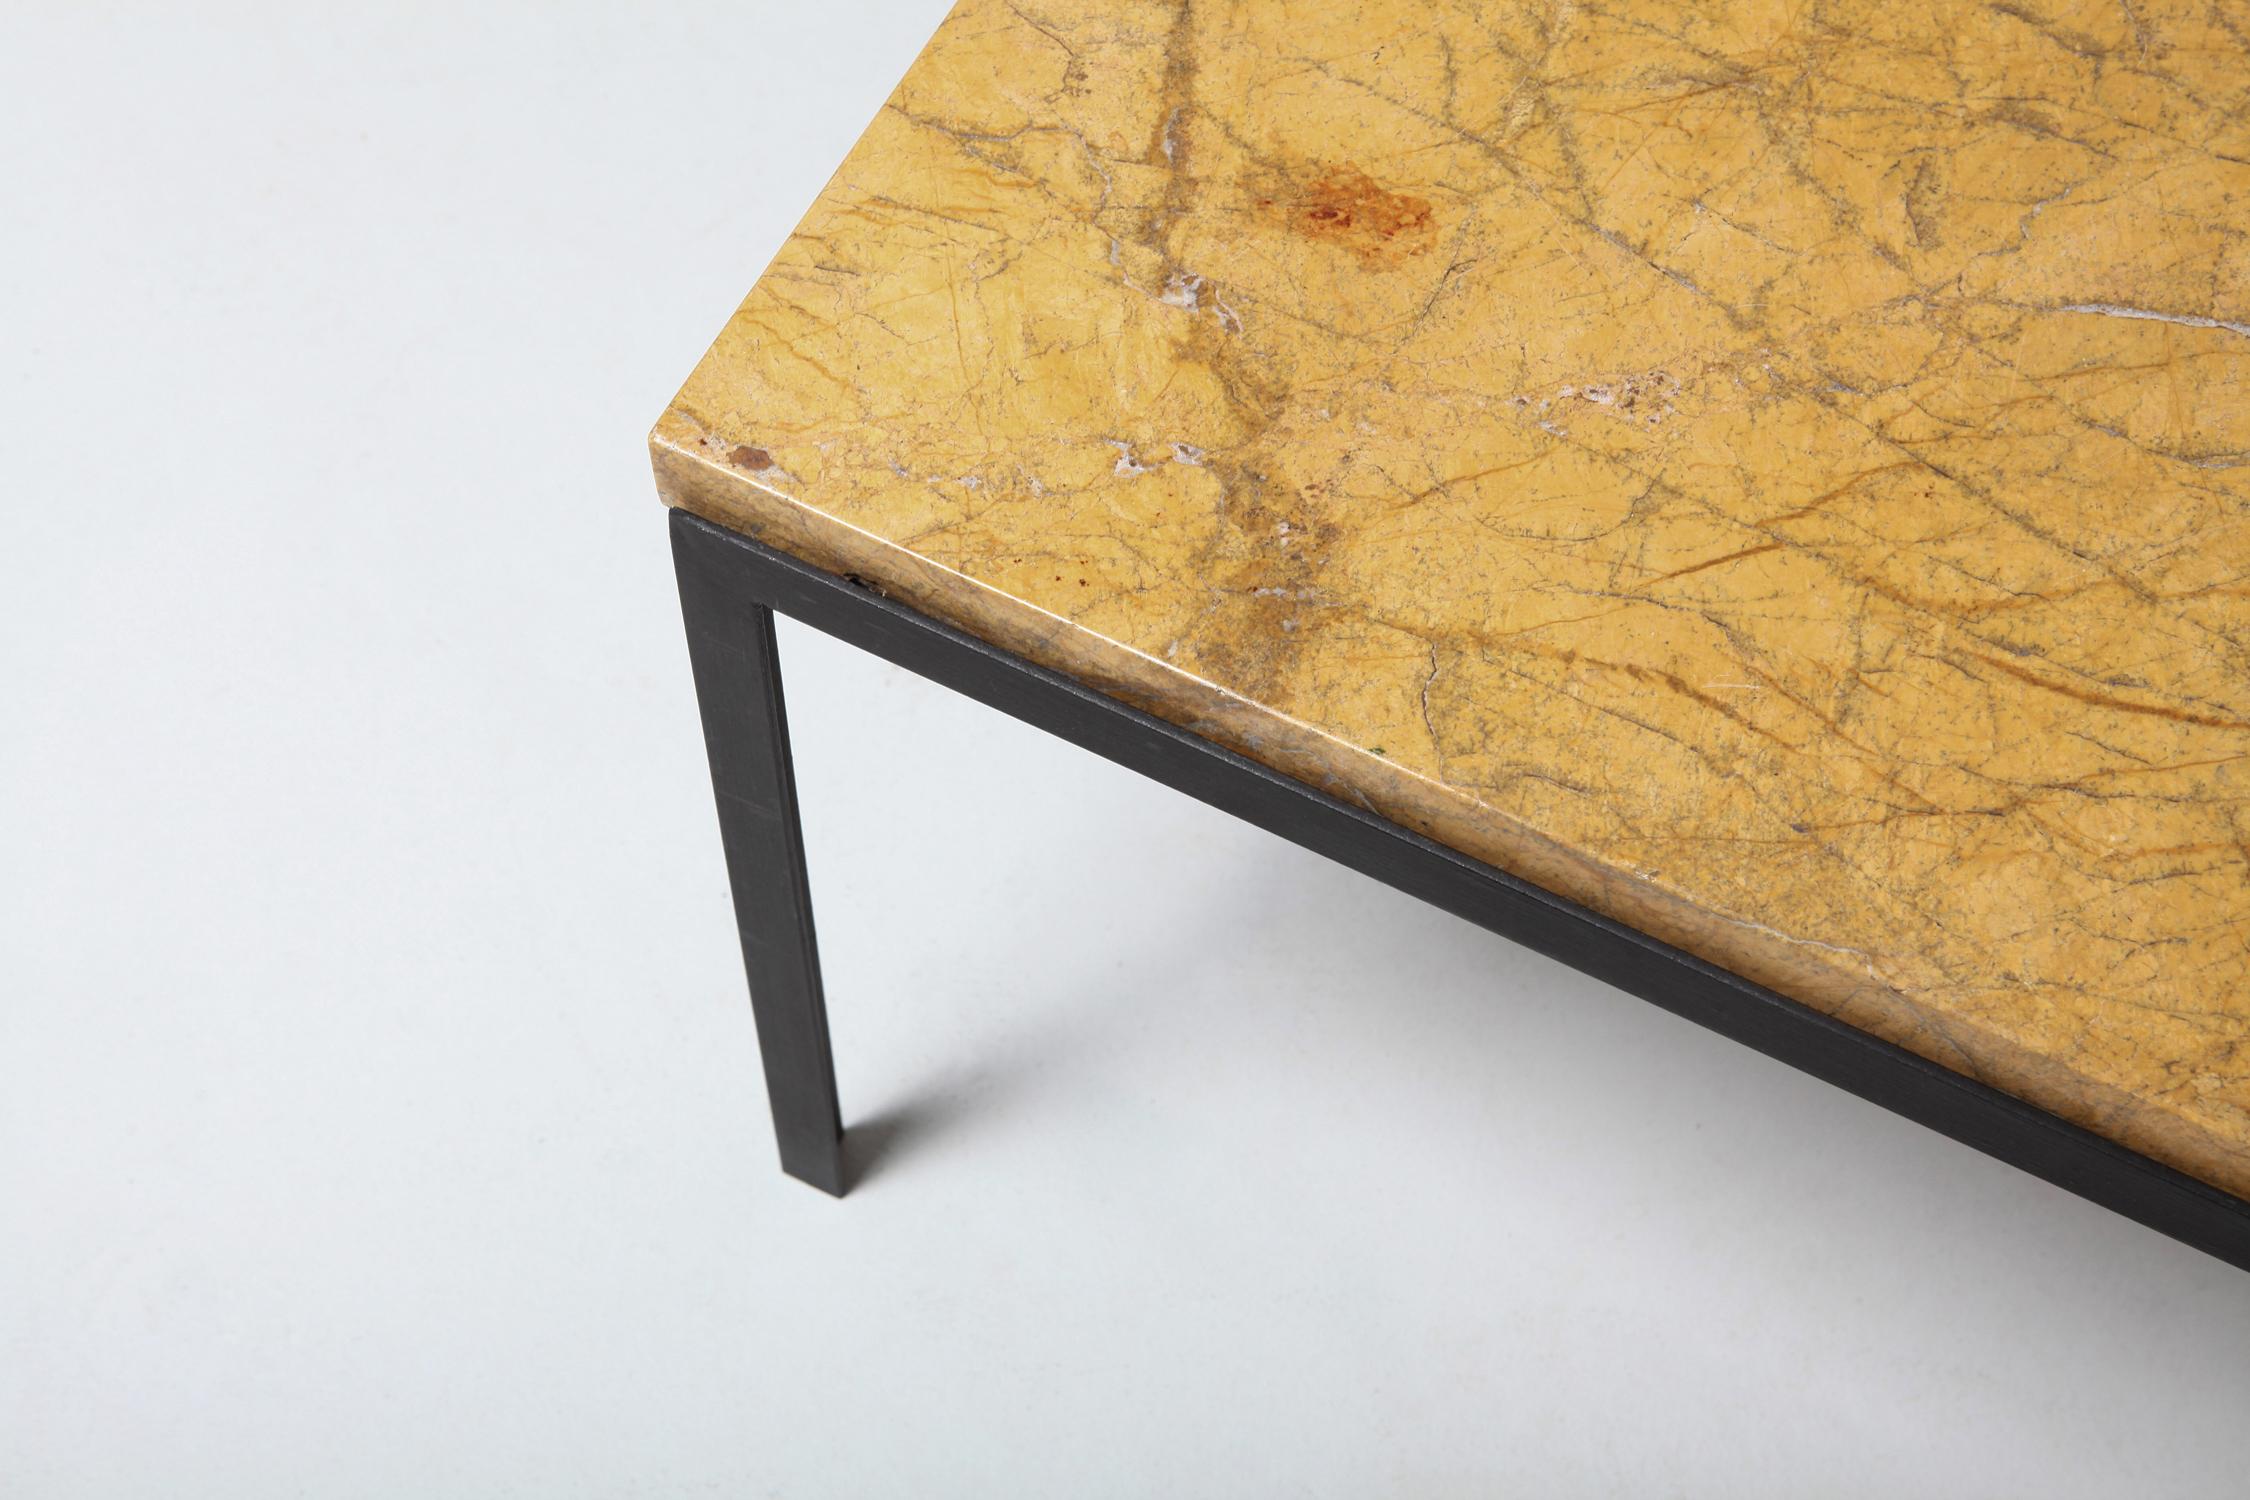 Mid-Century Modern marble side table, designed by Florence Knoll during the 1960s, and manufactured in the United States by Knoll.
We have a similar larger side table available in another listing.
Each table features a mustard colored marble